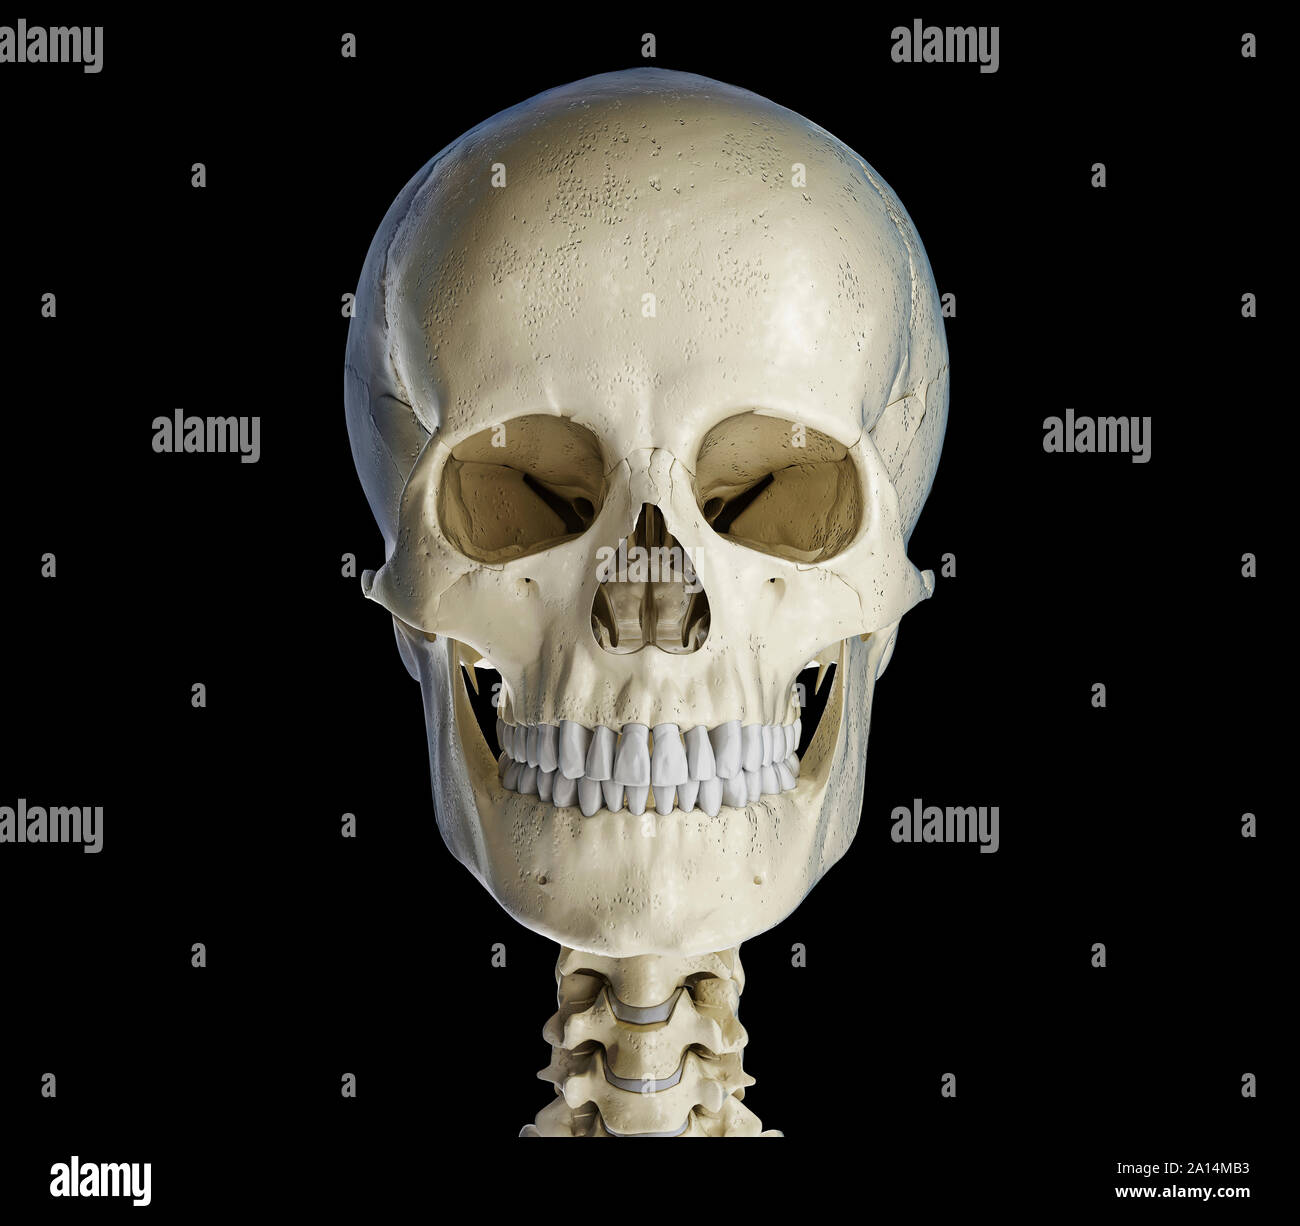 Human skull viewed from the front, on black background. Stock Photo